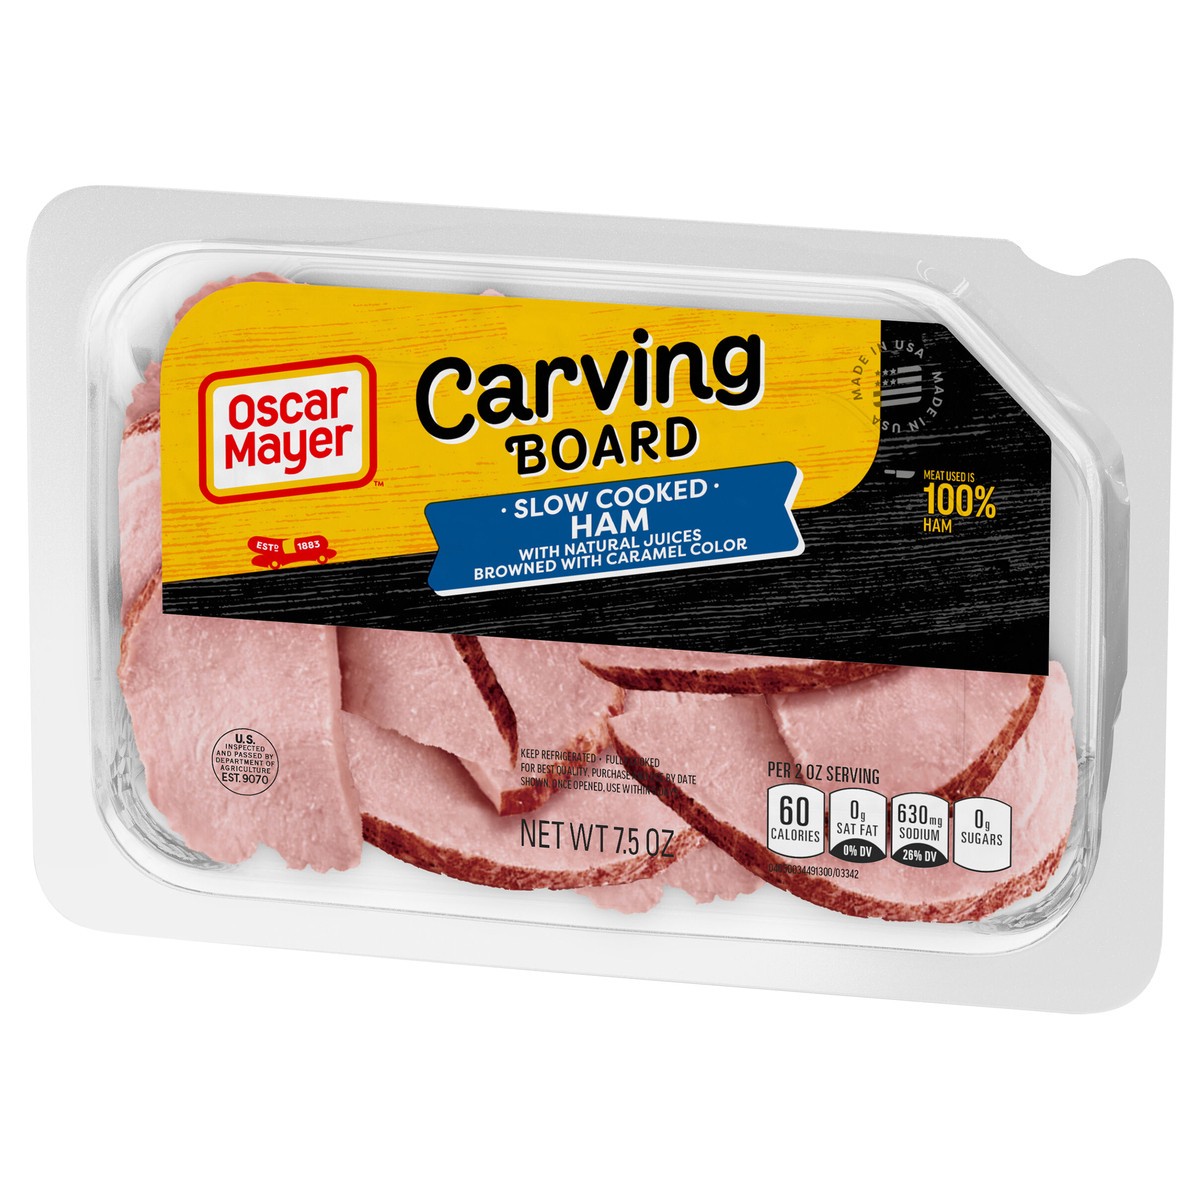 slide 2 of 9, Oscar Mayer Carving Board Slow Cooked Ham Sliced Lunch Meat, 7.5 oz. Tray, 7.5 oz